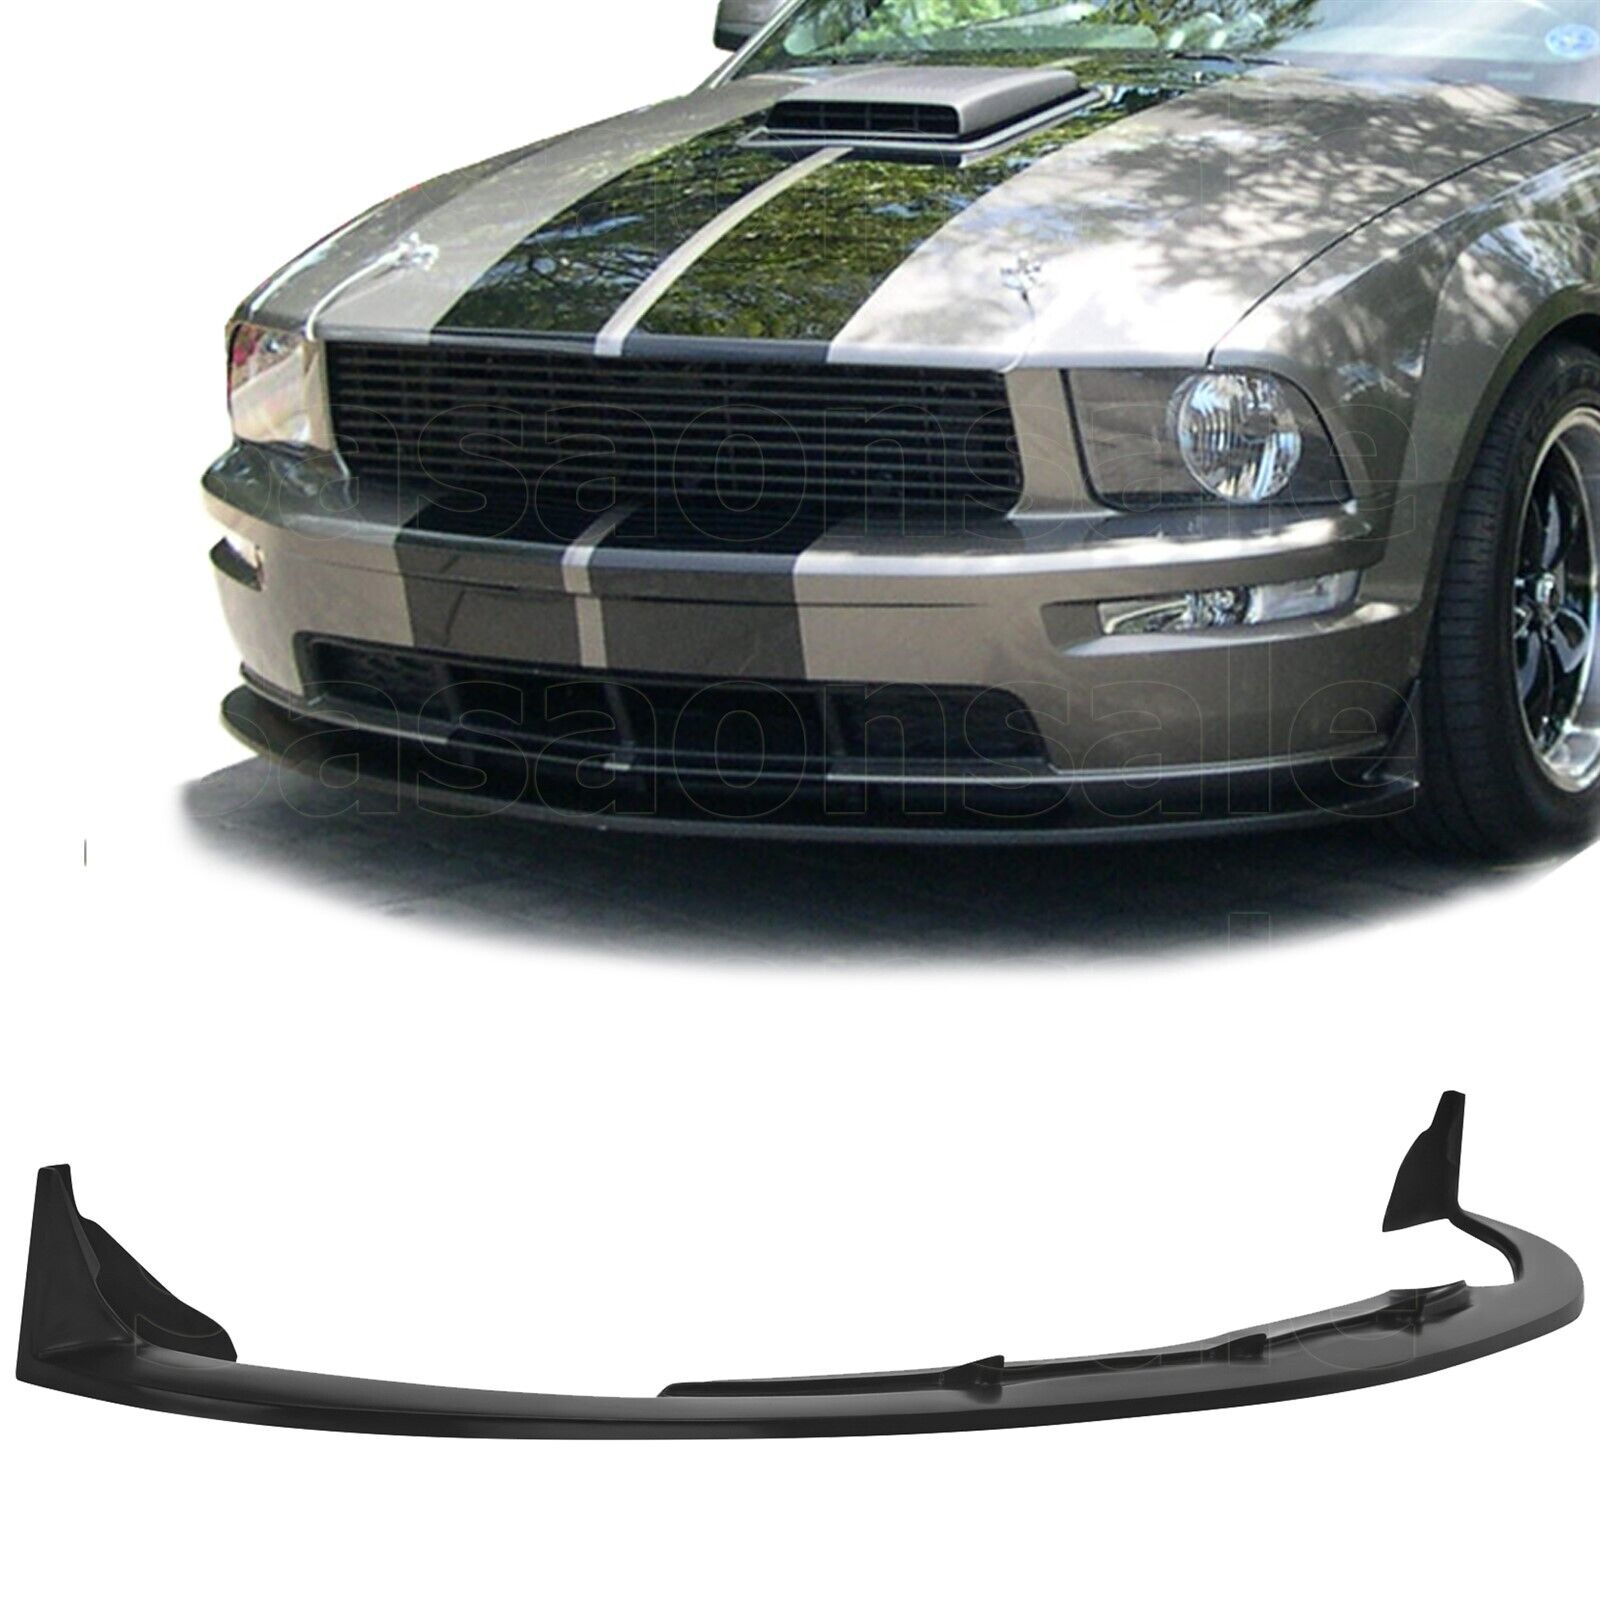 [SASA] Fit for 05-09 Ford Mustang V8 GT Only CV-III PU Front Bumper Lip Splitter